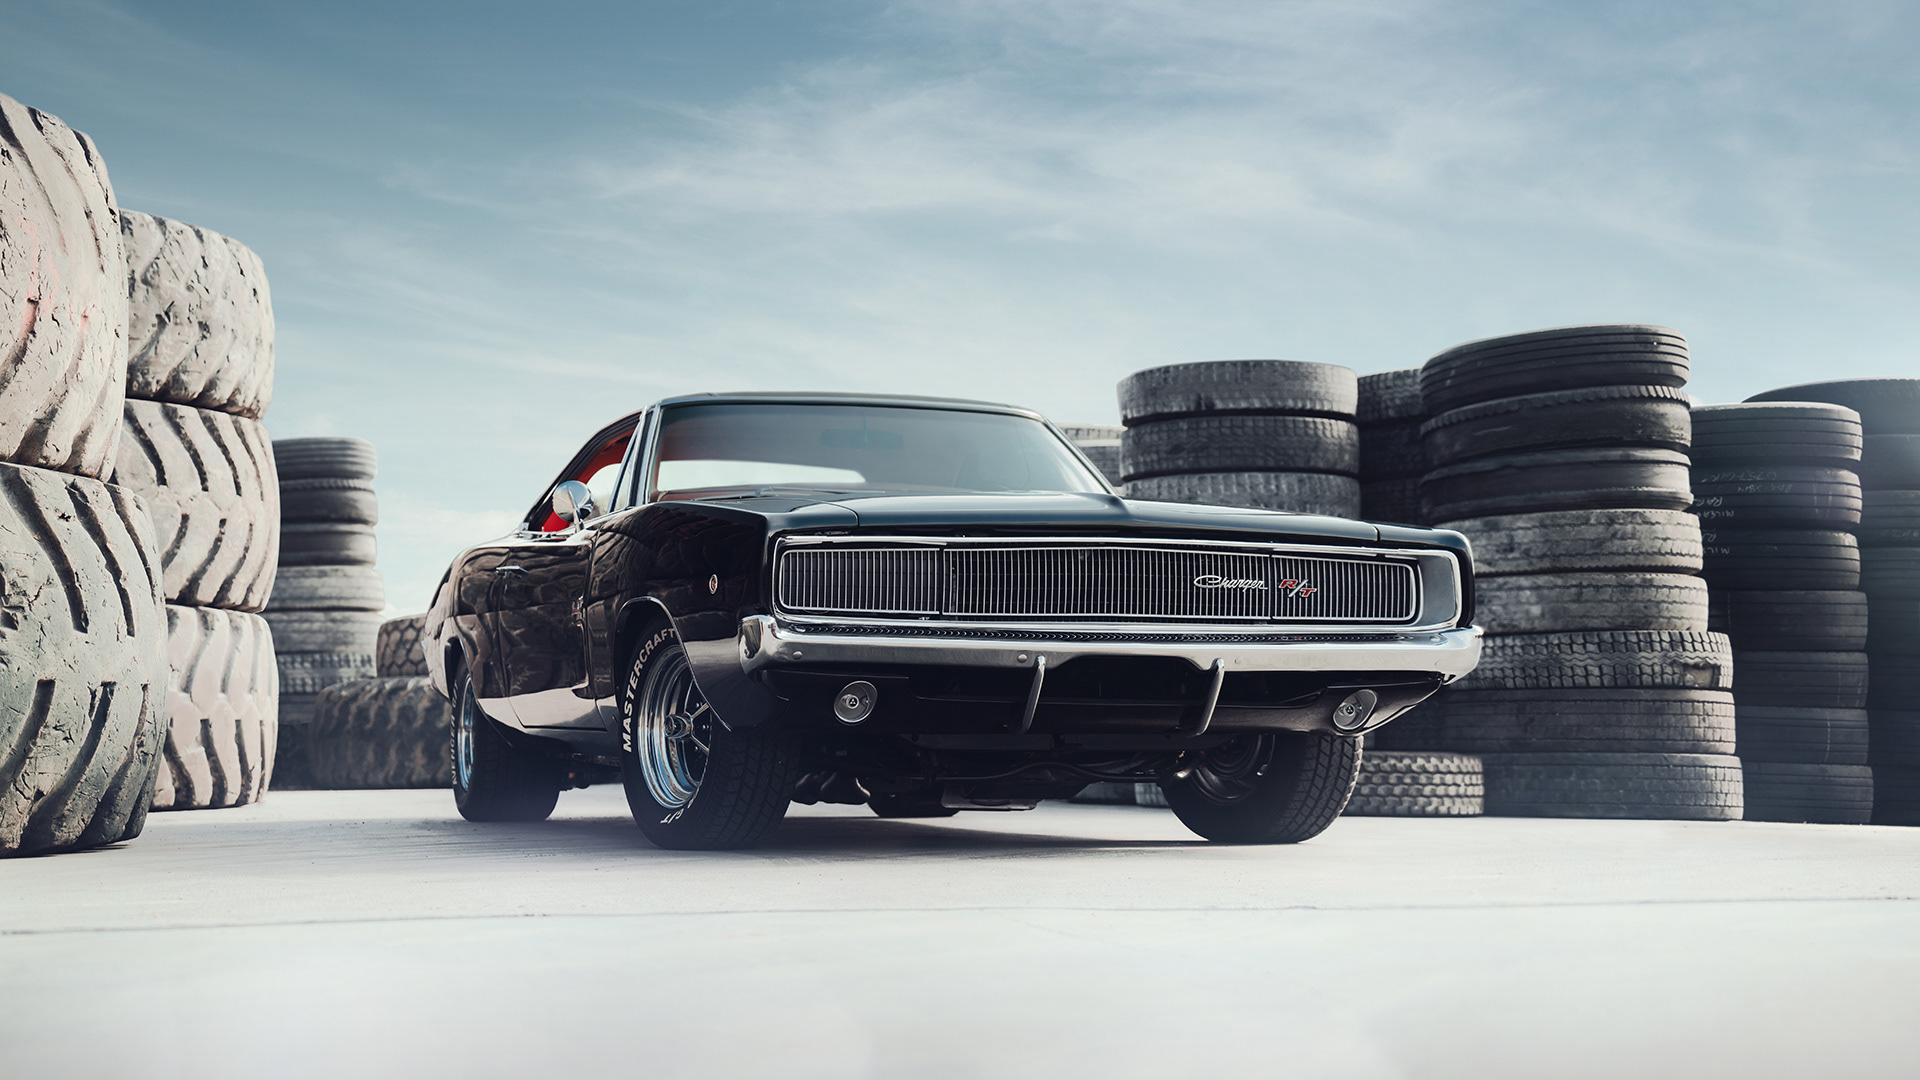 Charger RT Dodge Charger R T 1968 Car Black Cars Tires Sky Dodge Pop Up Headlights 1920x1080